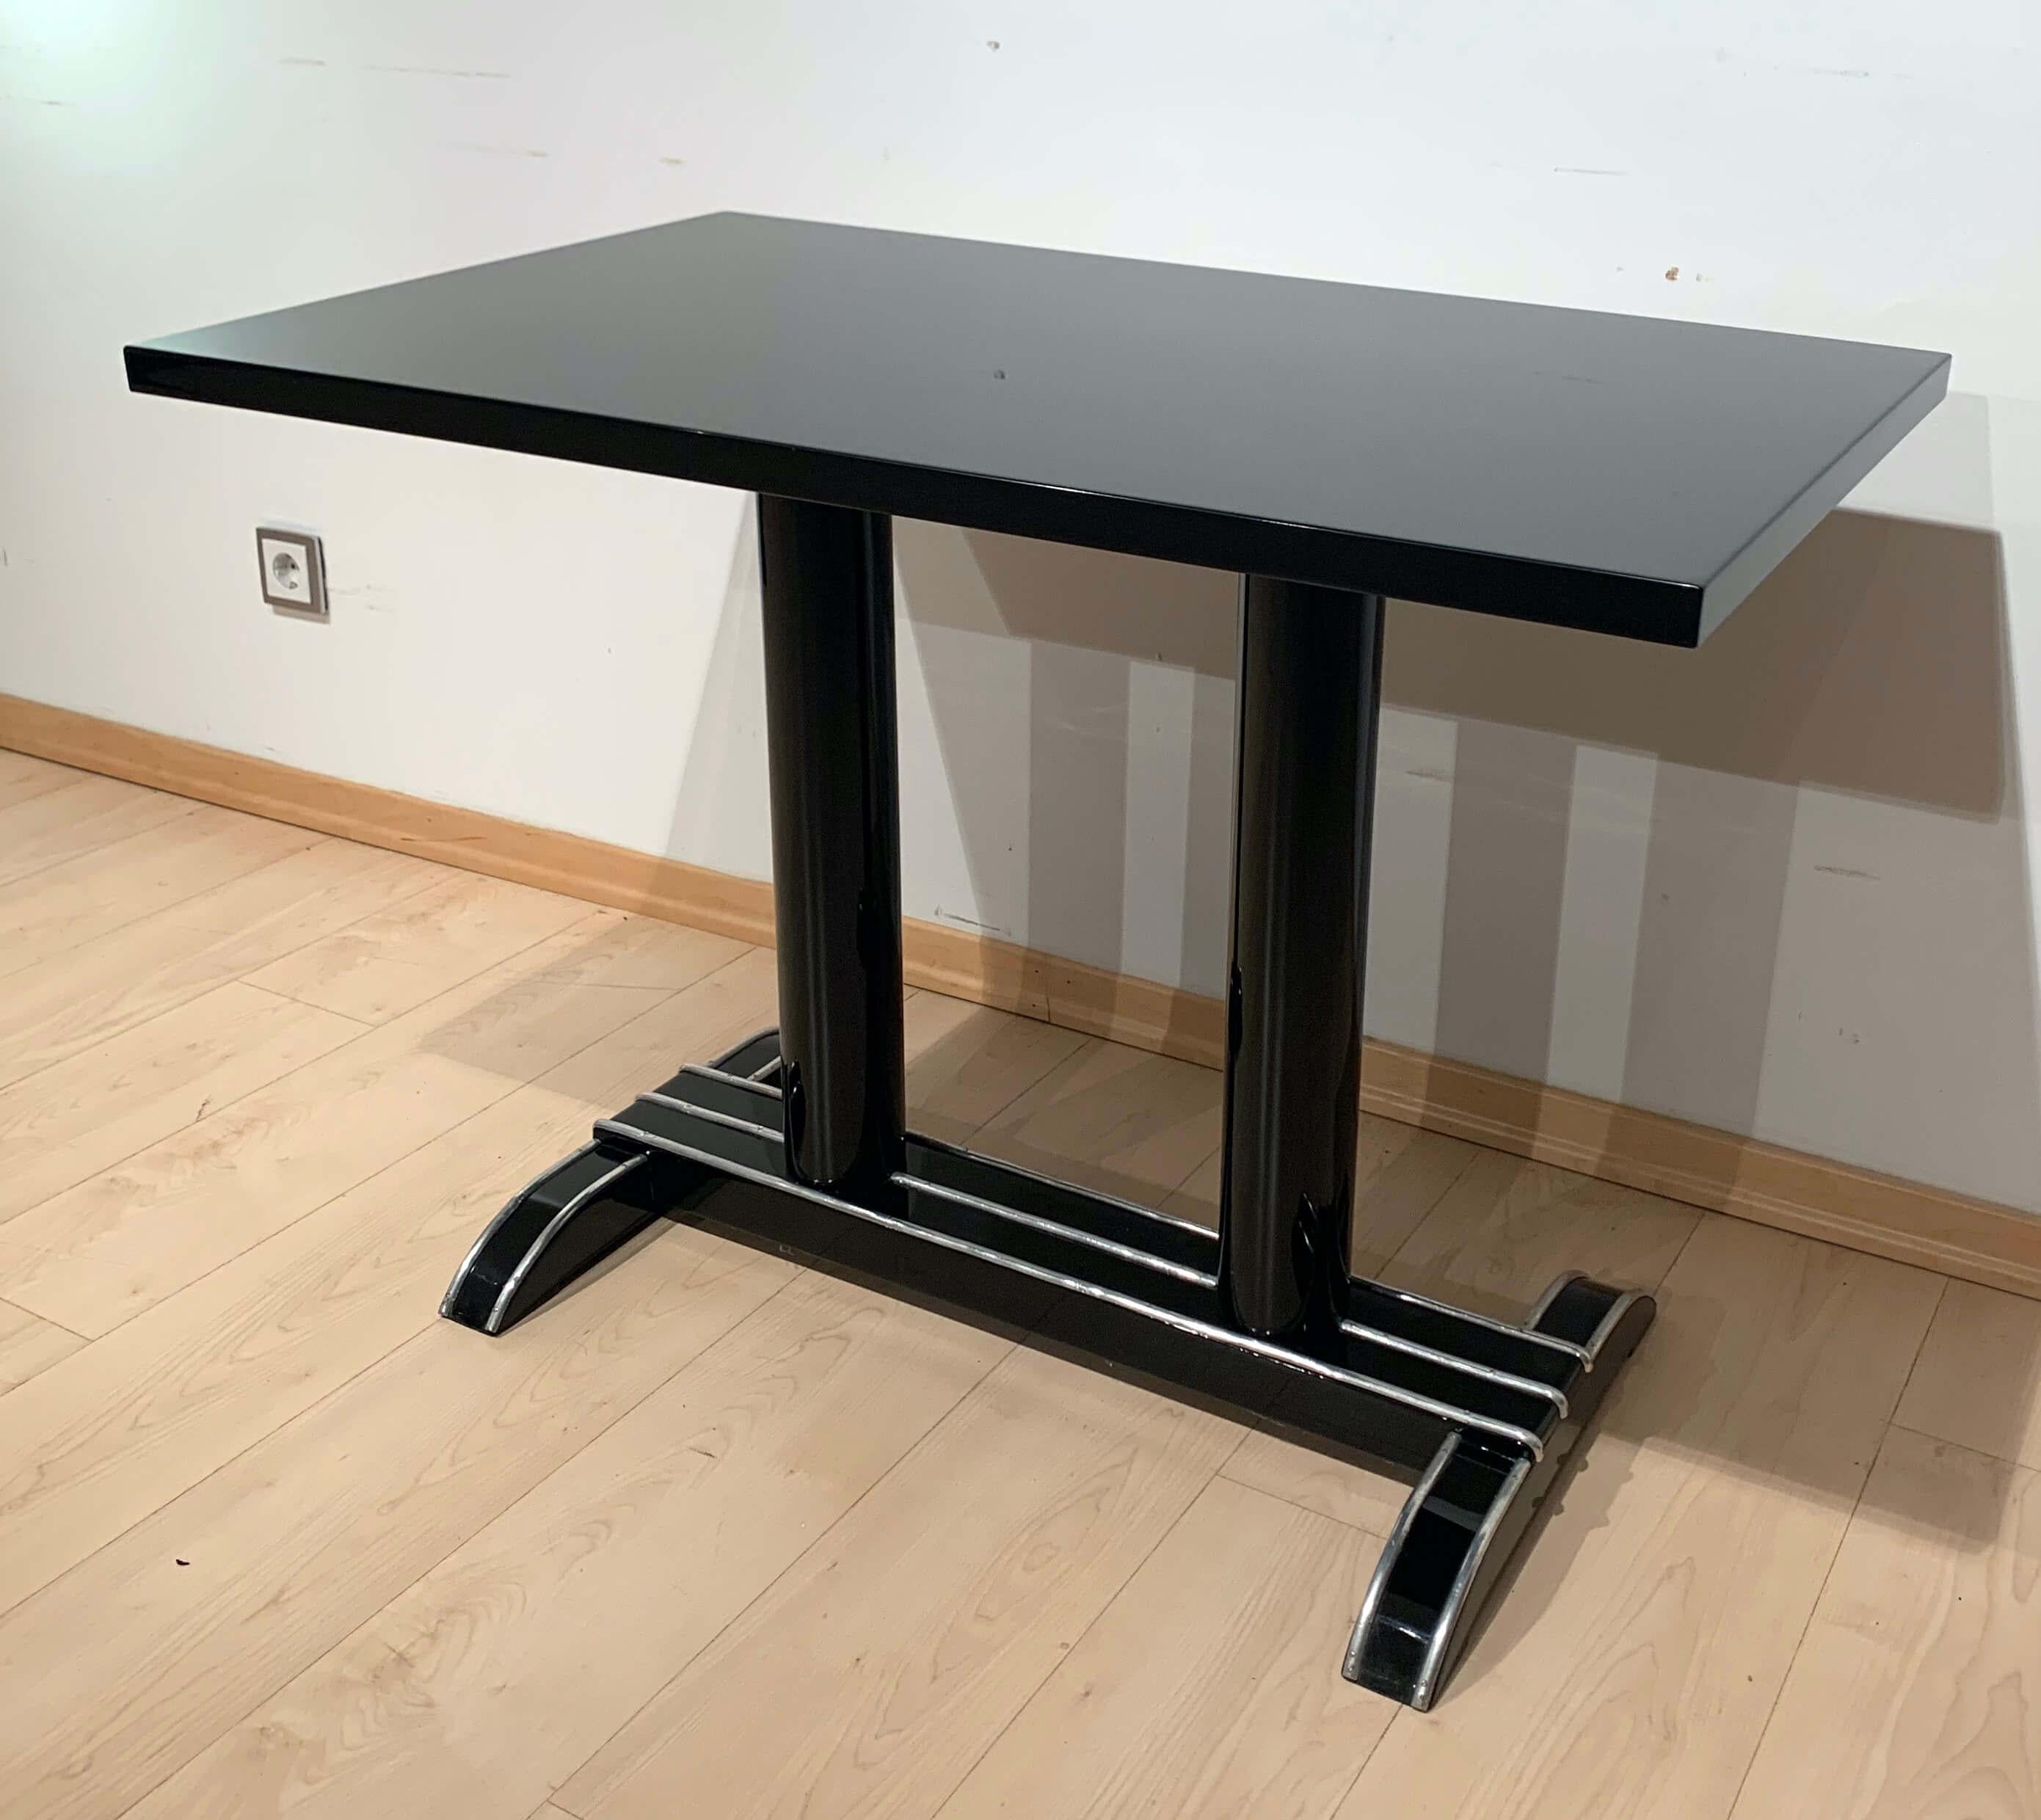 French Art Deco Bistro or Side Table, Black Lacquer, Aluminum Trims, France, 1930s